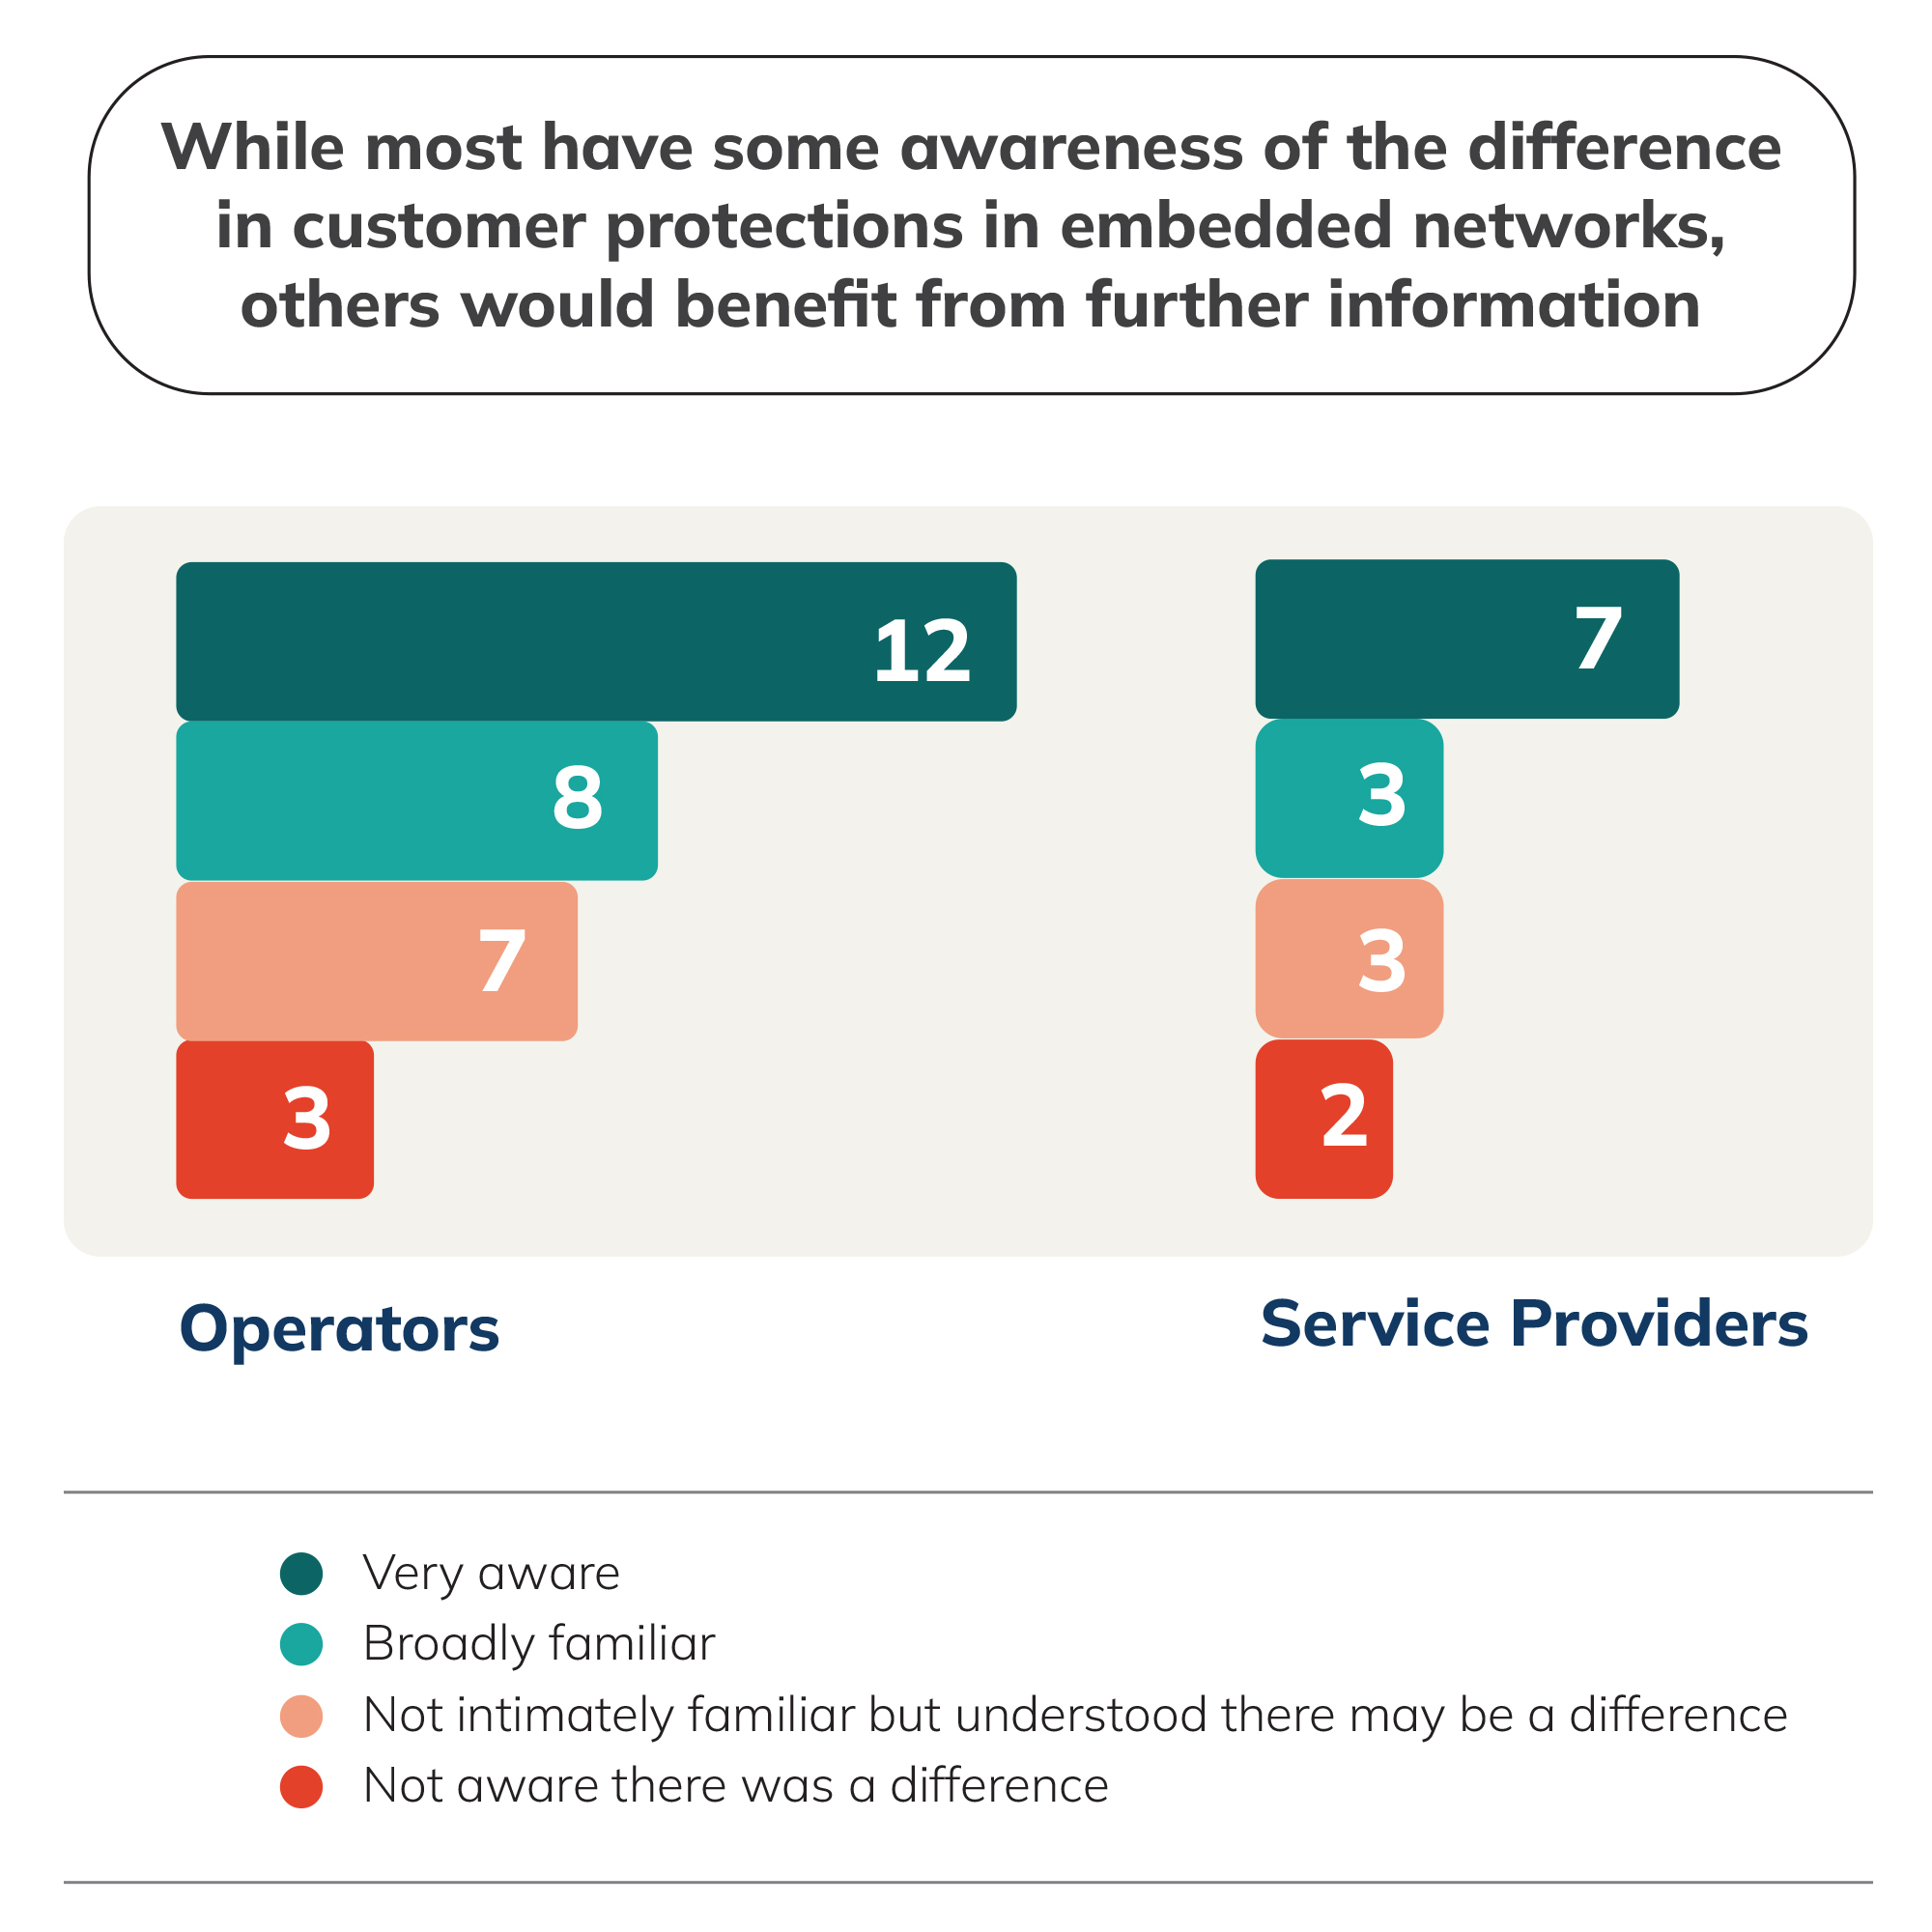 Network Operators and Service Providers 2 - While most have some awareness of the difference in customer protections in embedded netowrks, others would benefit from further information